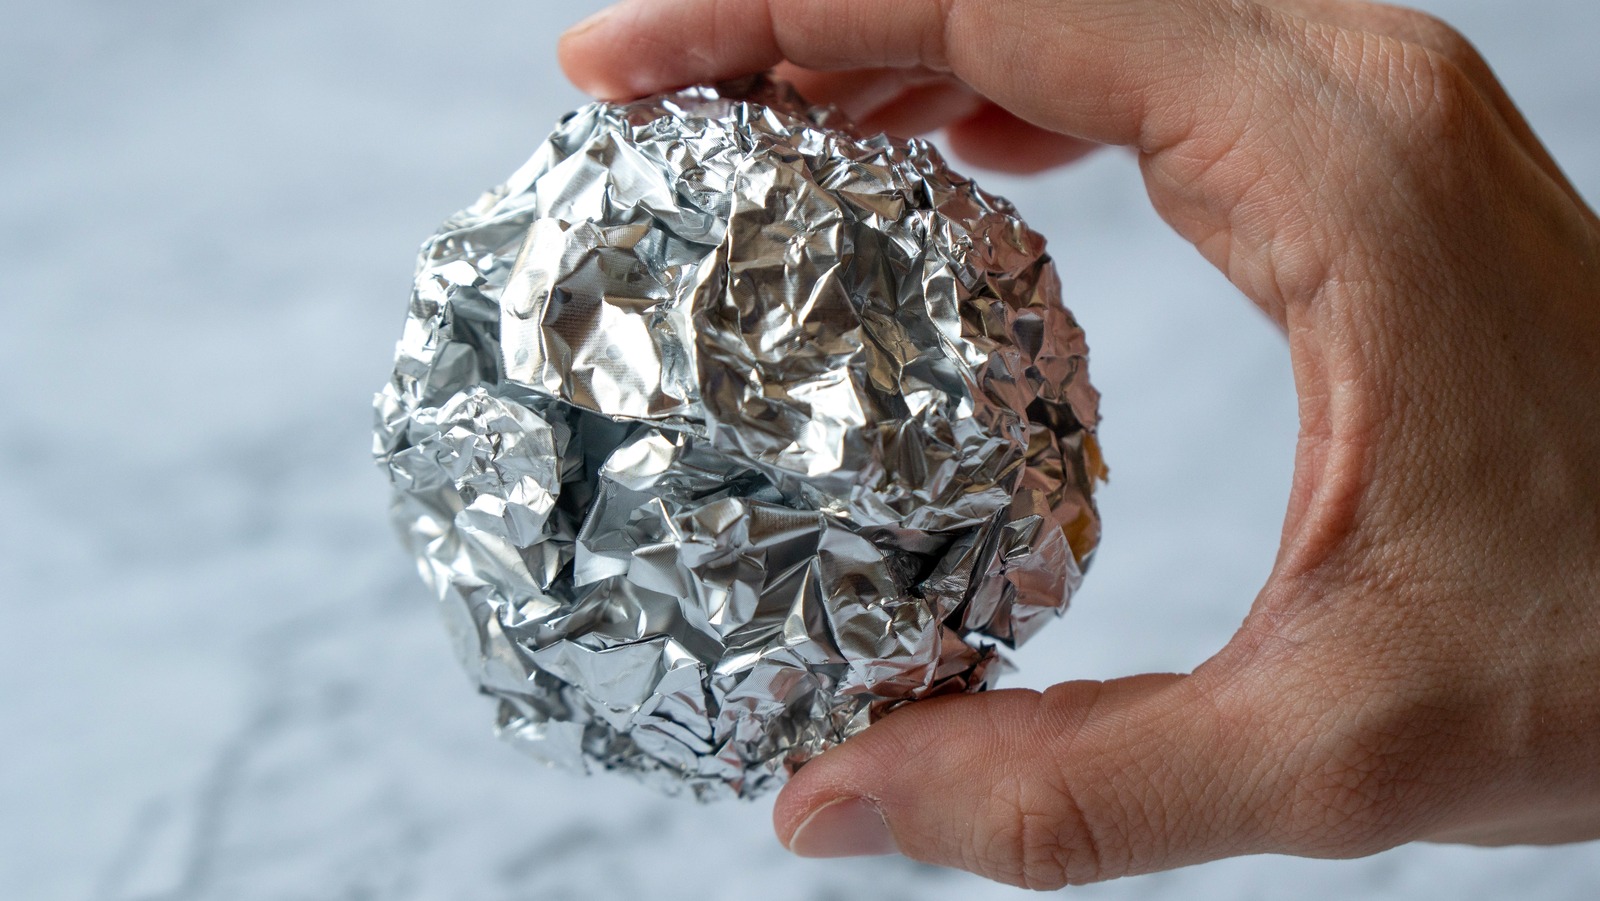 You Should Be Cleaning Your Kitchen With Aluminum Foil